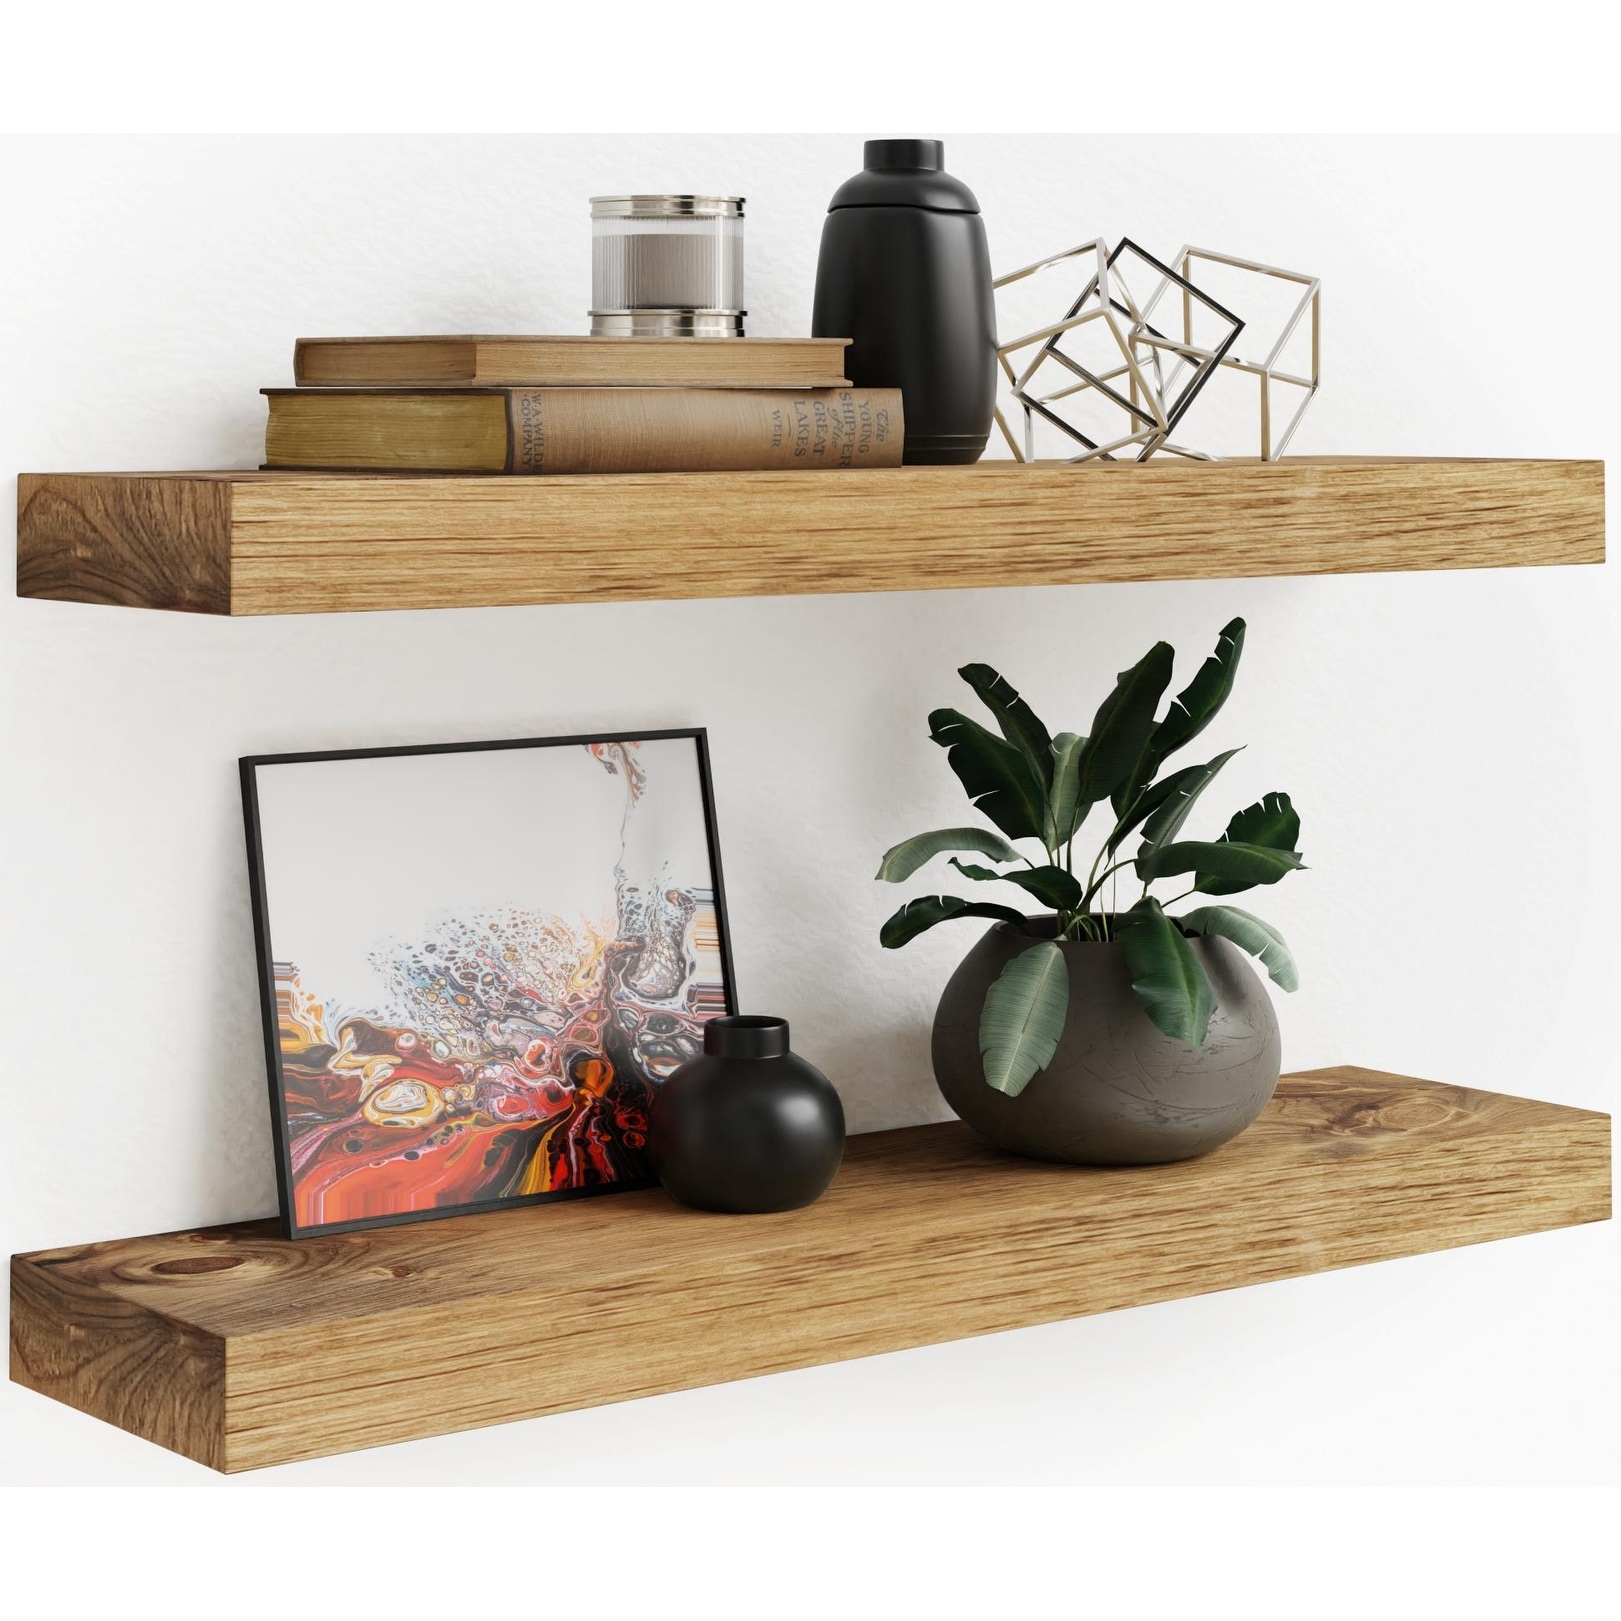 Rustic Wooden Floating Wall Shelves (Set of 2) - Bed Bath & Beyond -  33050714